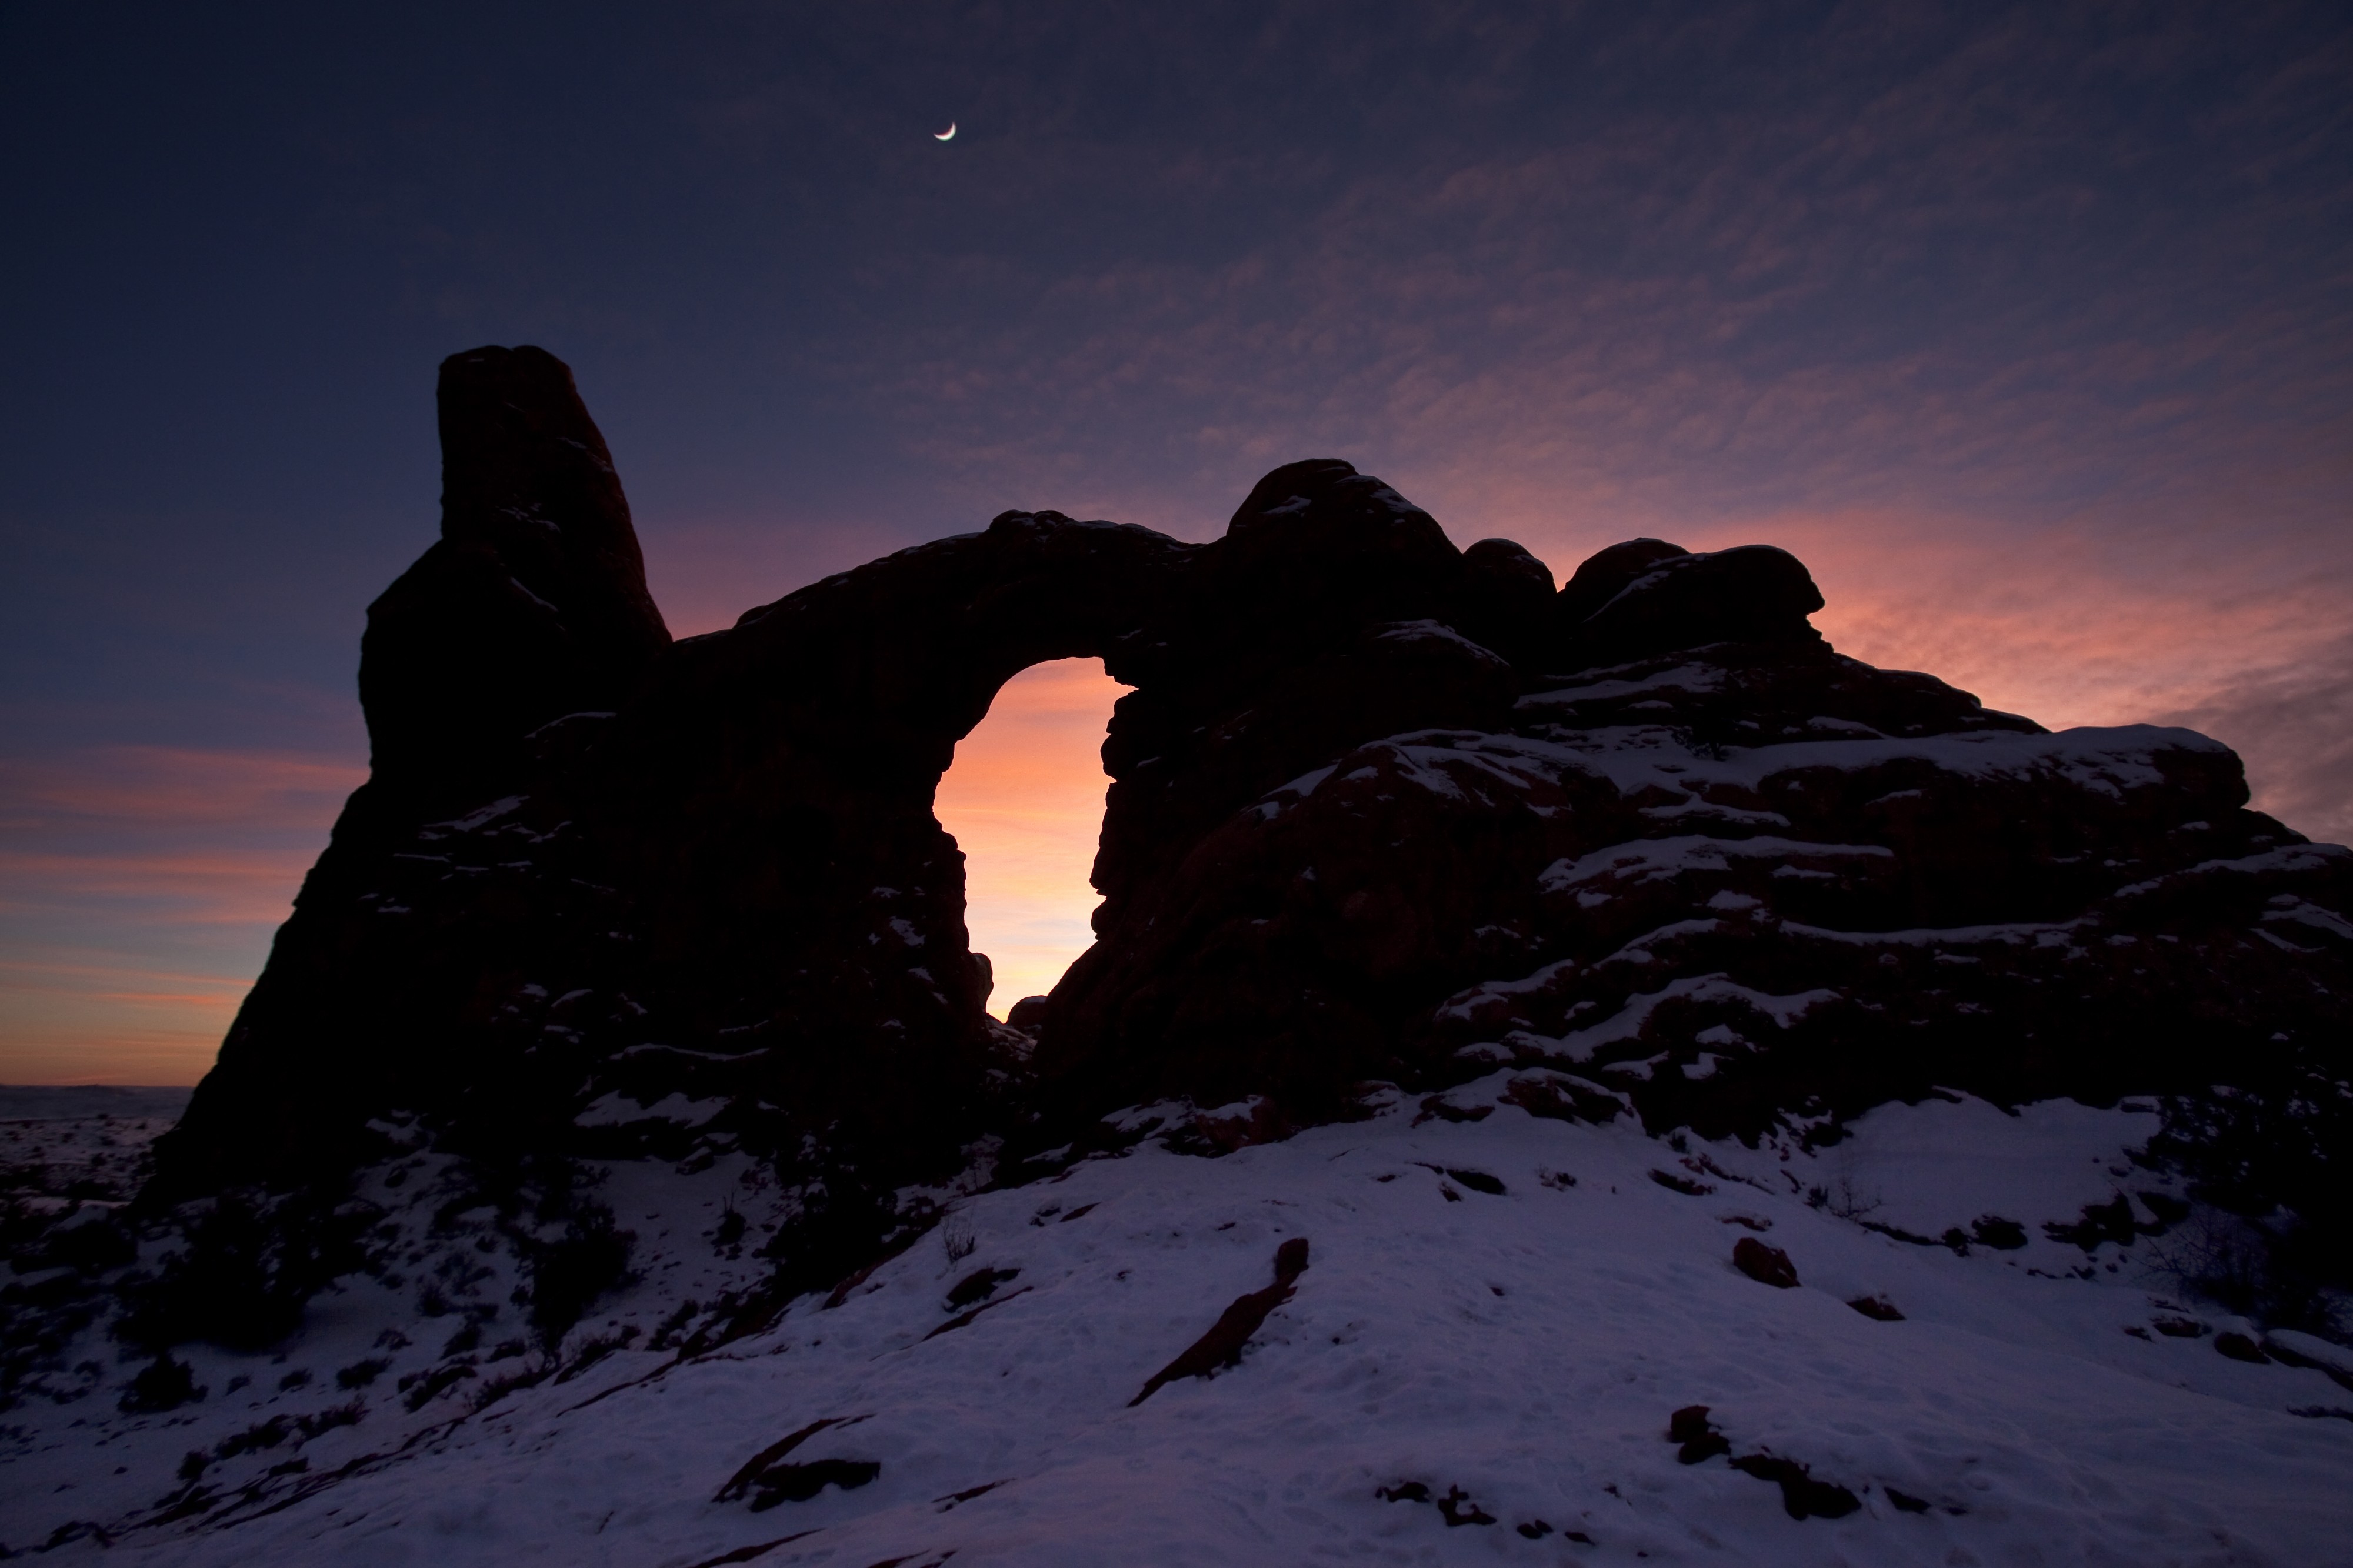 Turret Arch with waxing crescent moon (8390025486)